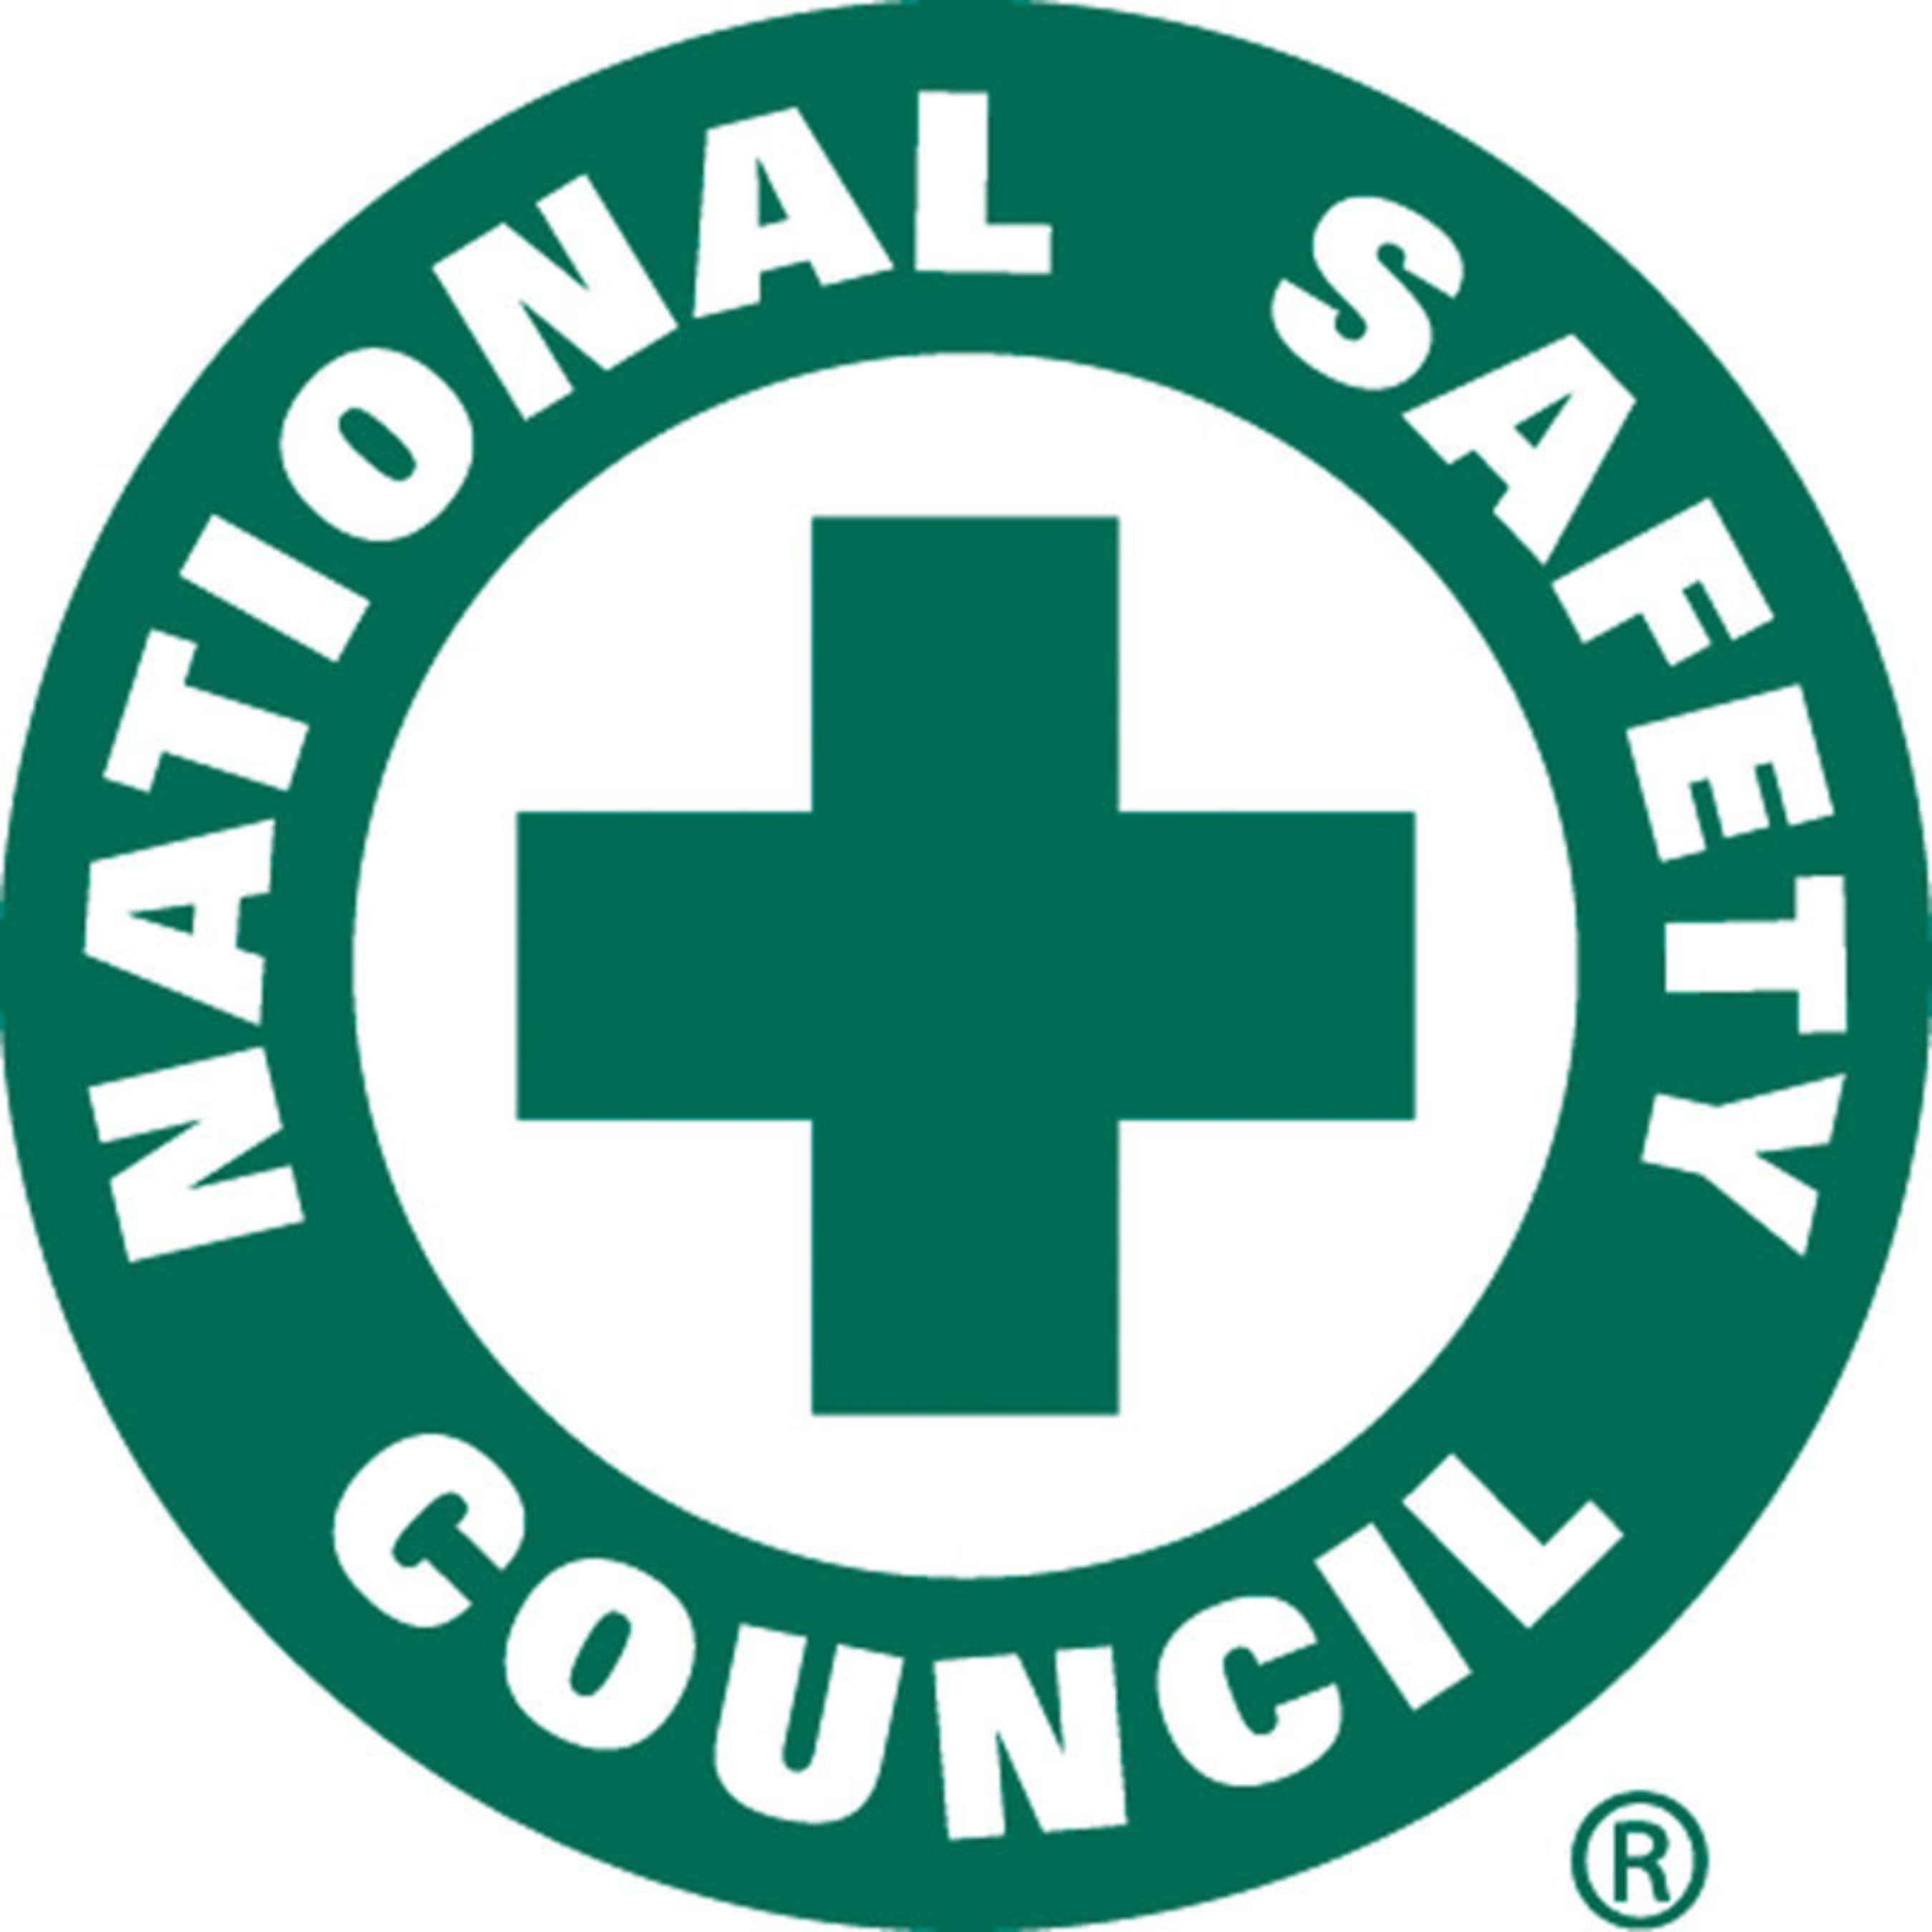 The mission of the National Safety Council is to save lives by preventing injuries and deaths at work, in homes and communities and on the road through leadership, research, education and advocacy. (PRNewsFoto/National Safety Council) (PRNewsFoto/National Safety Council)